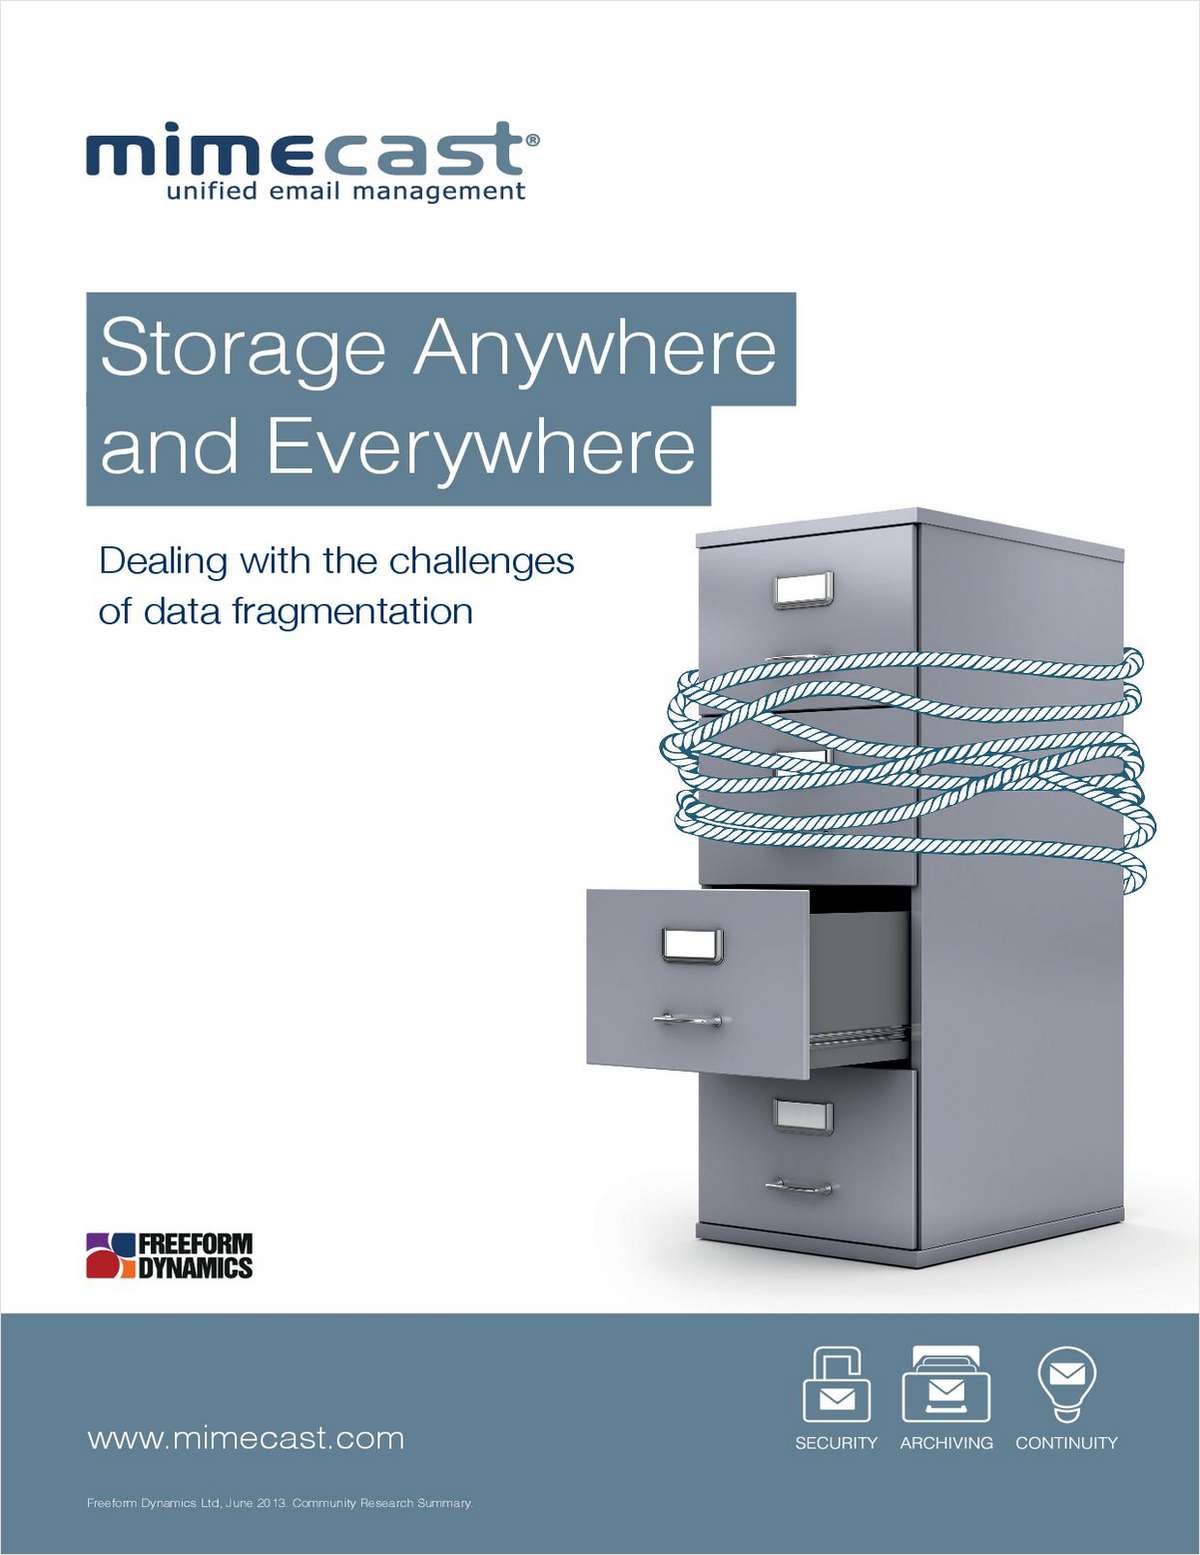 Storage Anywhere and Everywhere: Dealing with the Challenges of Data Fragmentation